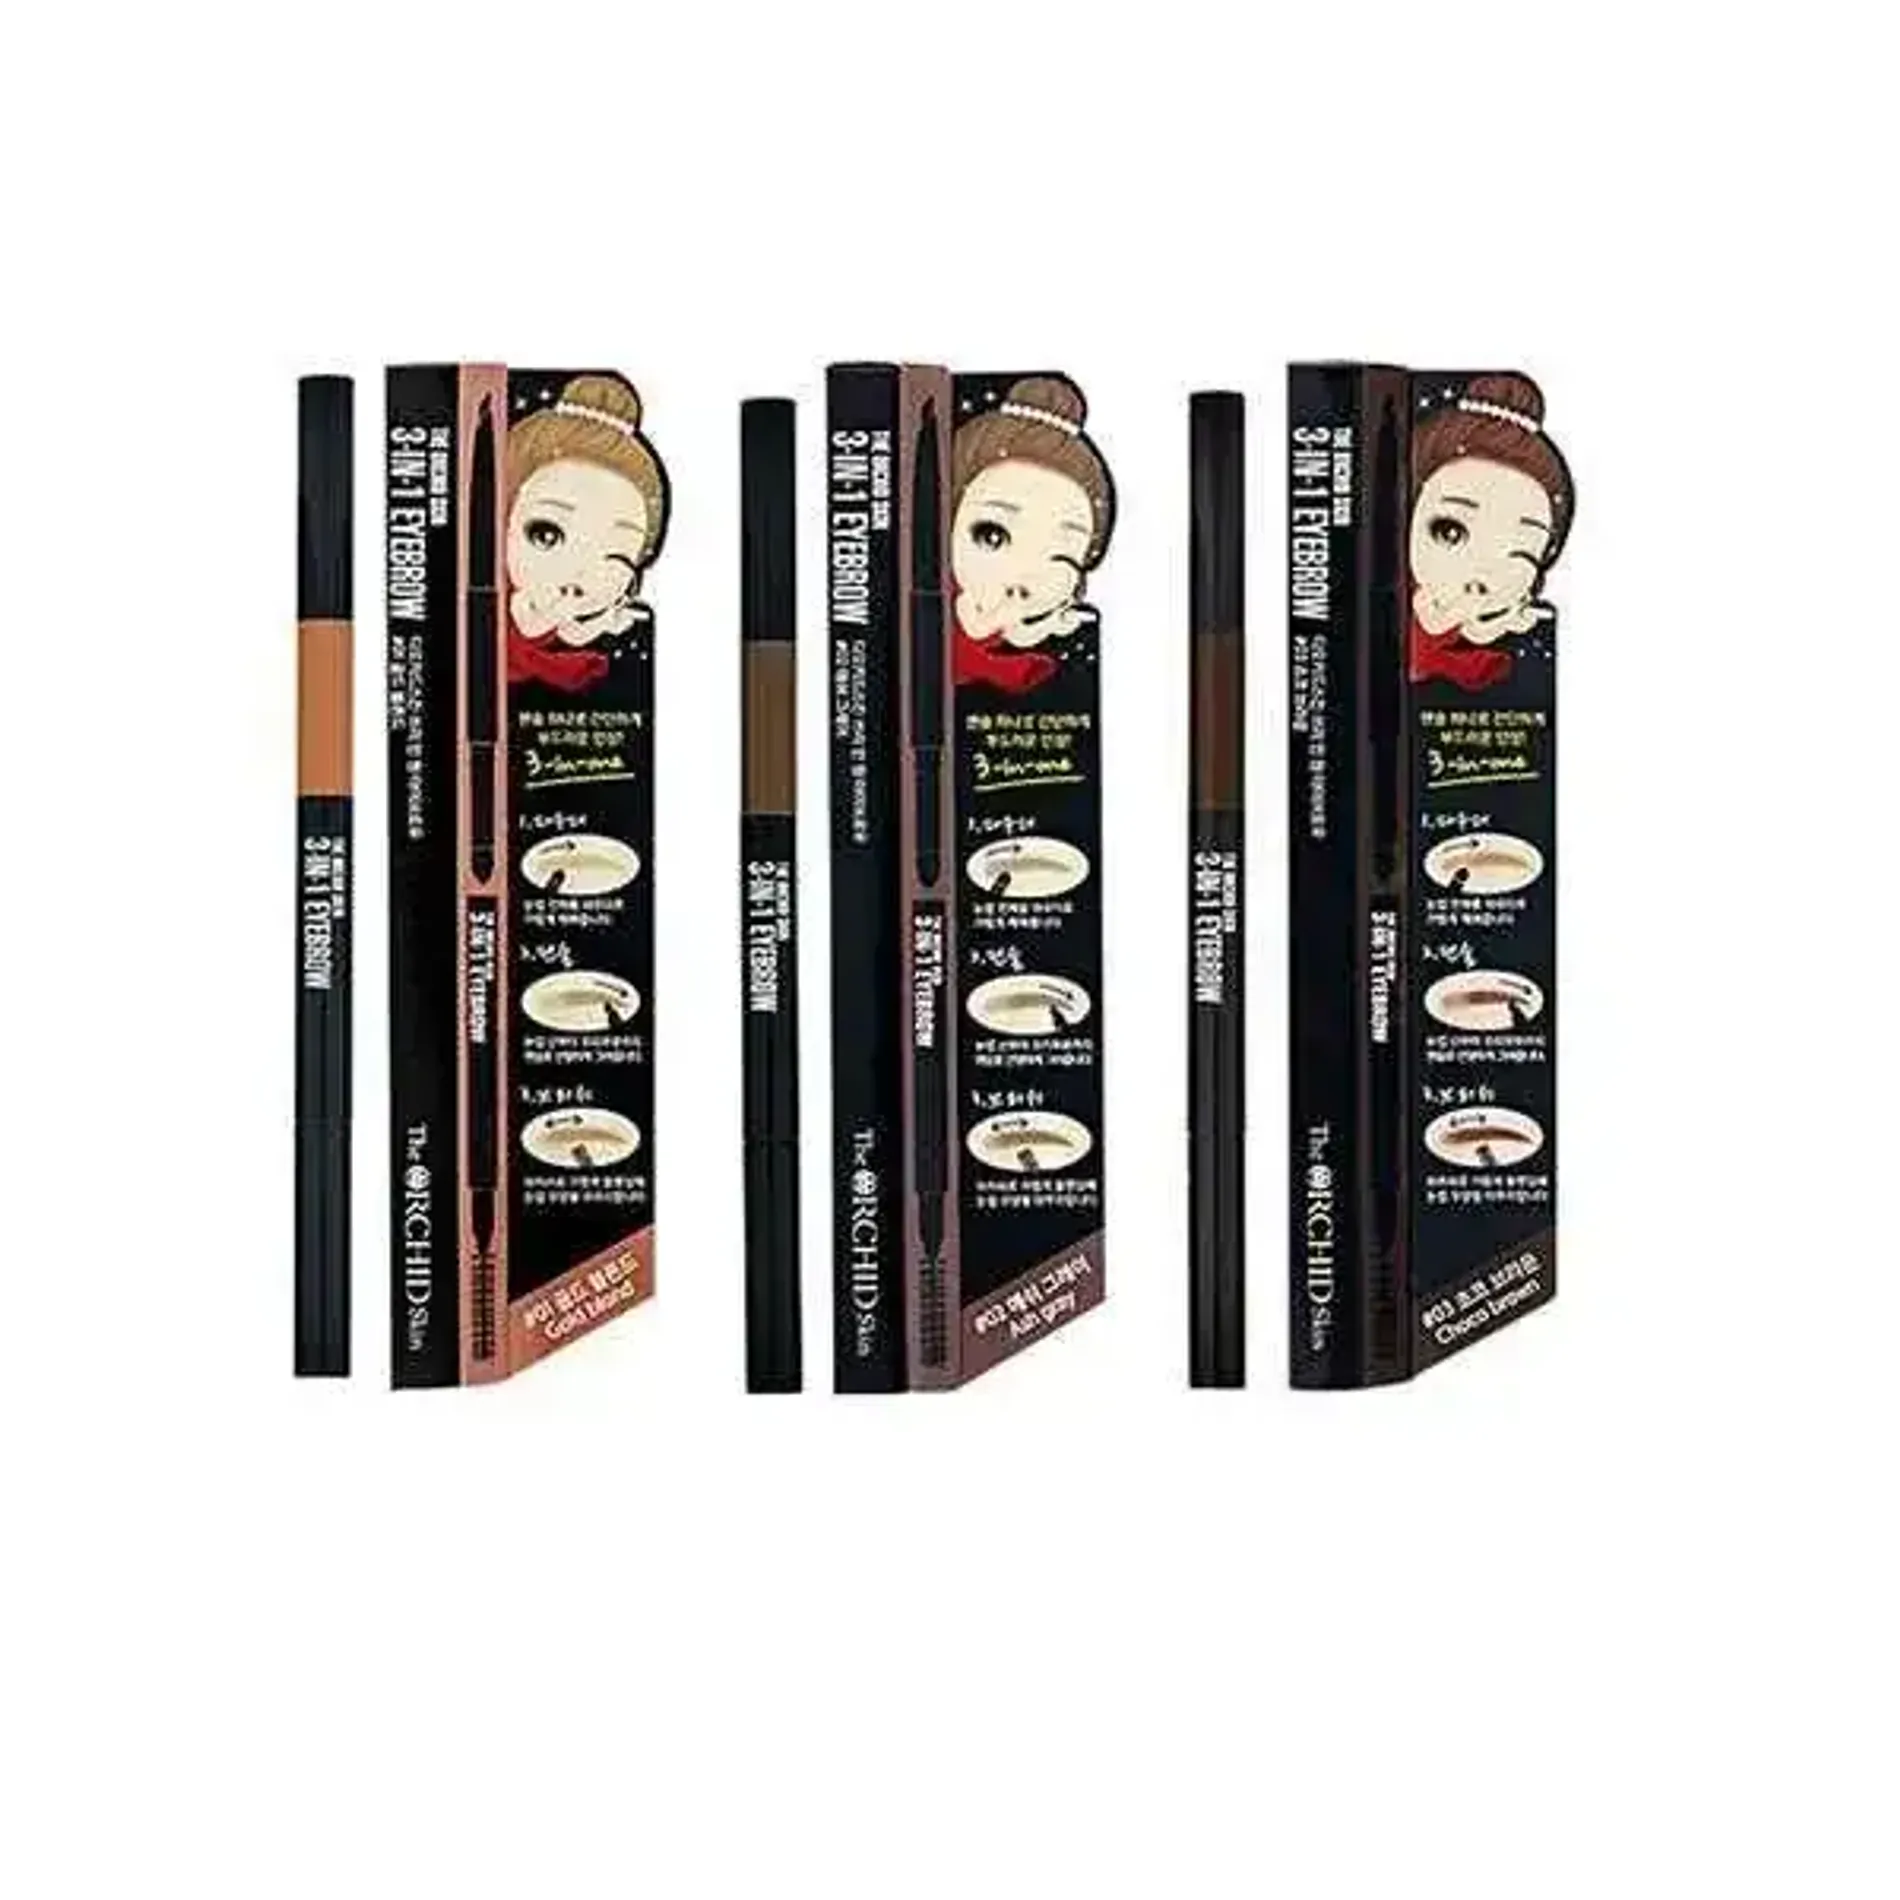 chi-ve-chan-may-the-orchid-skin-3-in-1-eyebrow-03-choco-brown-3